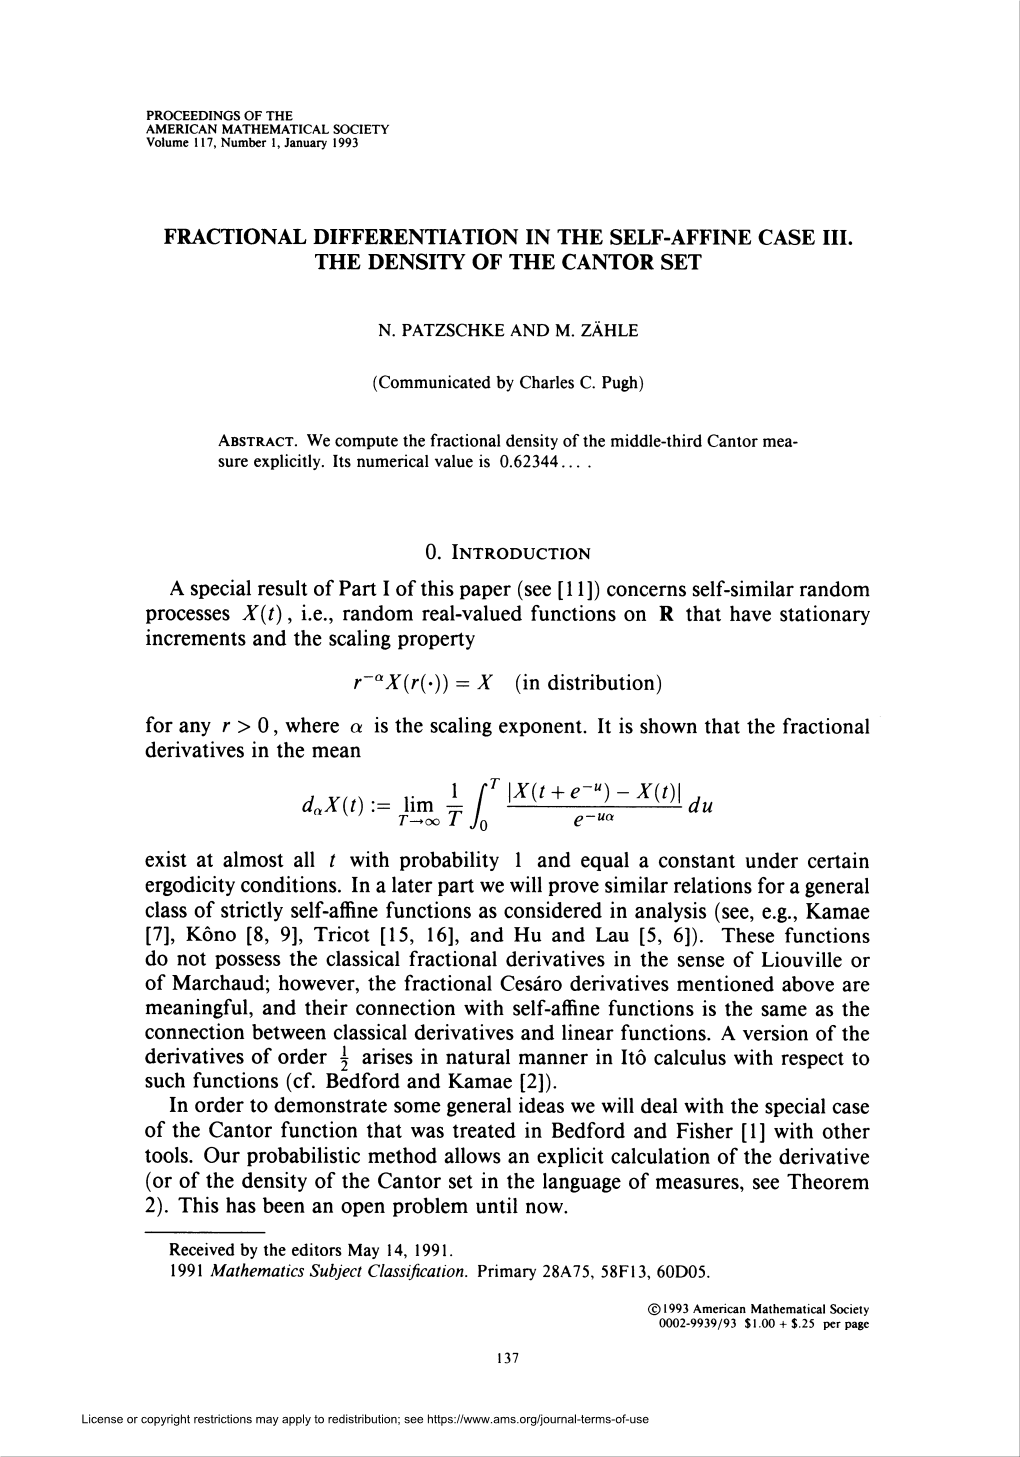 Fractional Differentiation in the Self-Affine Case Iii